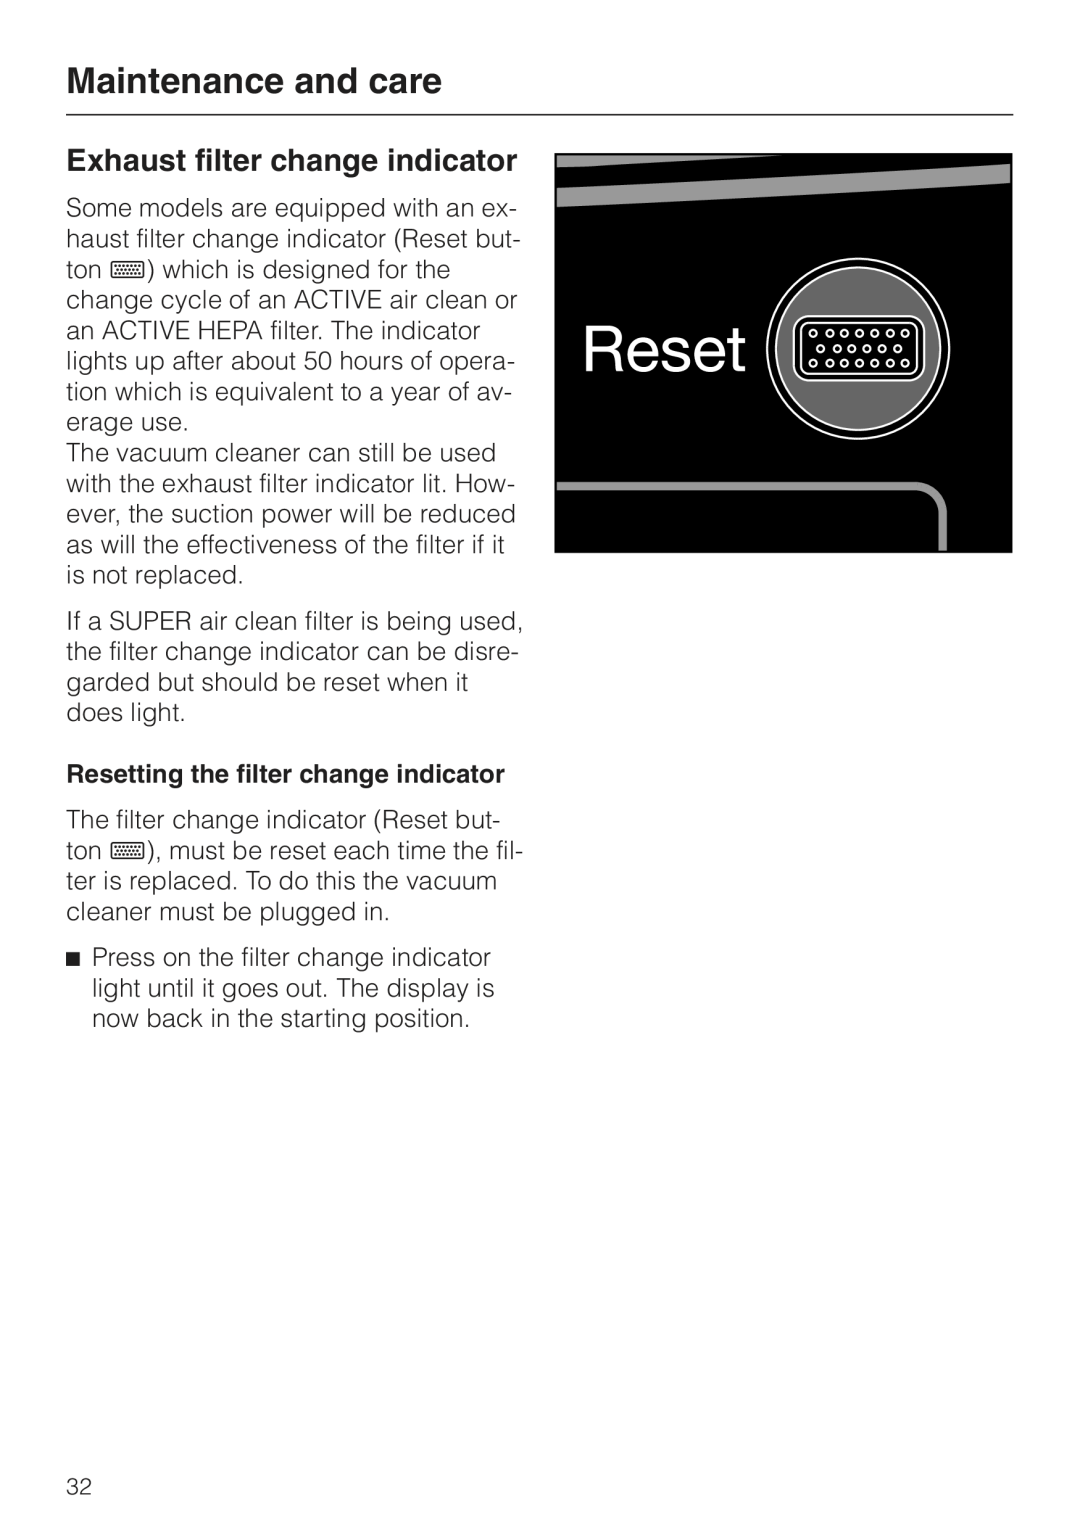 Miele S 500 - S 548 manual Exhaust filter change indicator, Maintenance and care, Resetting the filter change indicator 